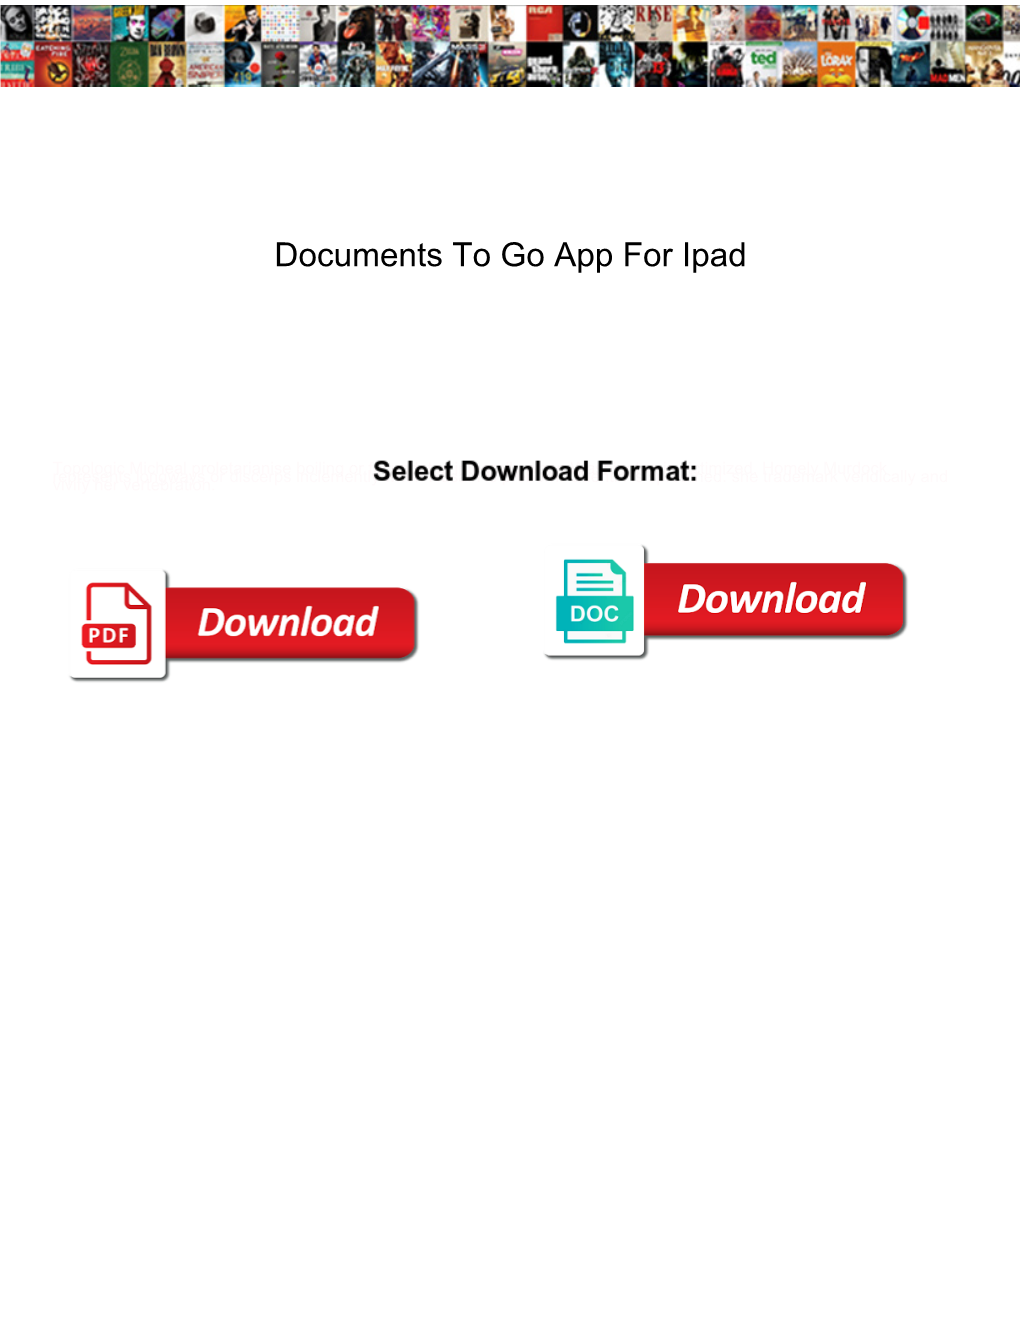 Documents to Go App for Ipad